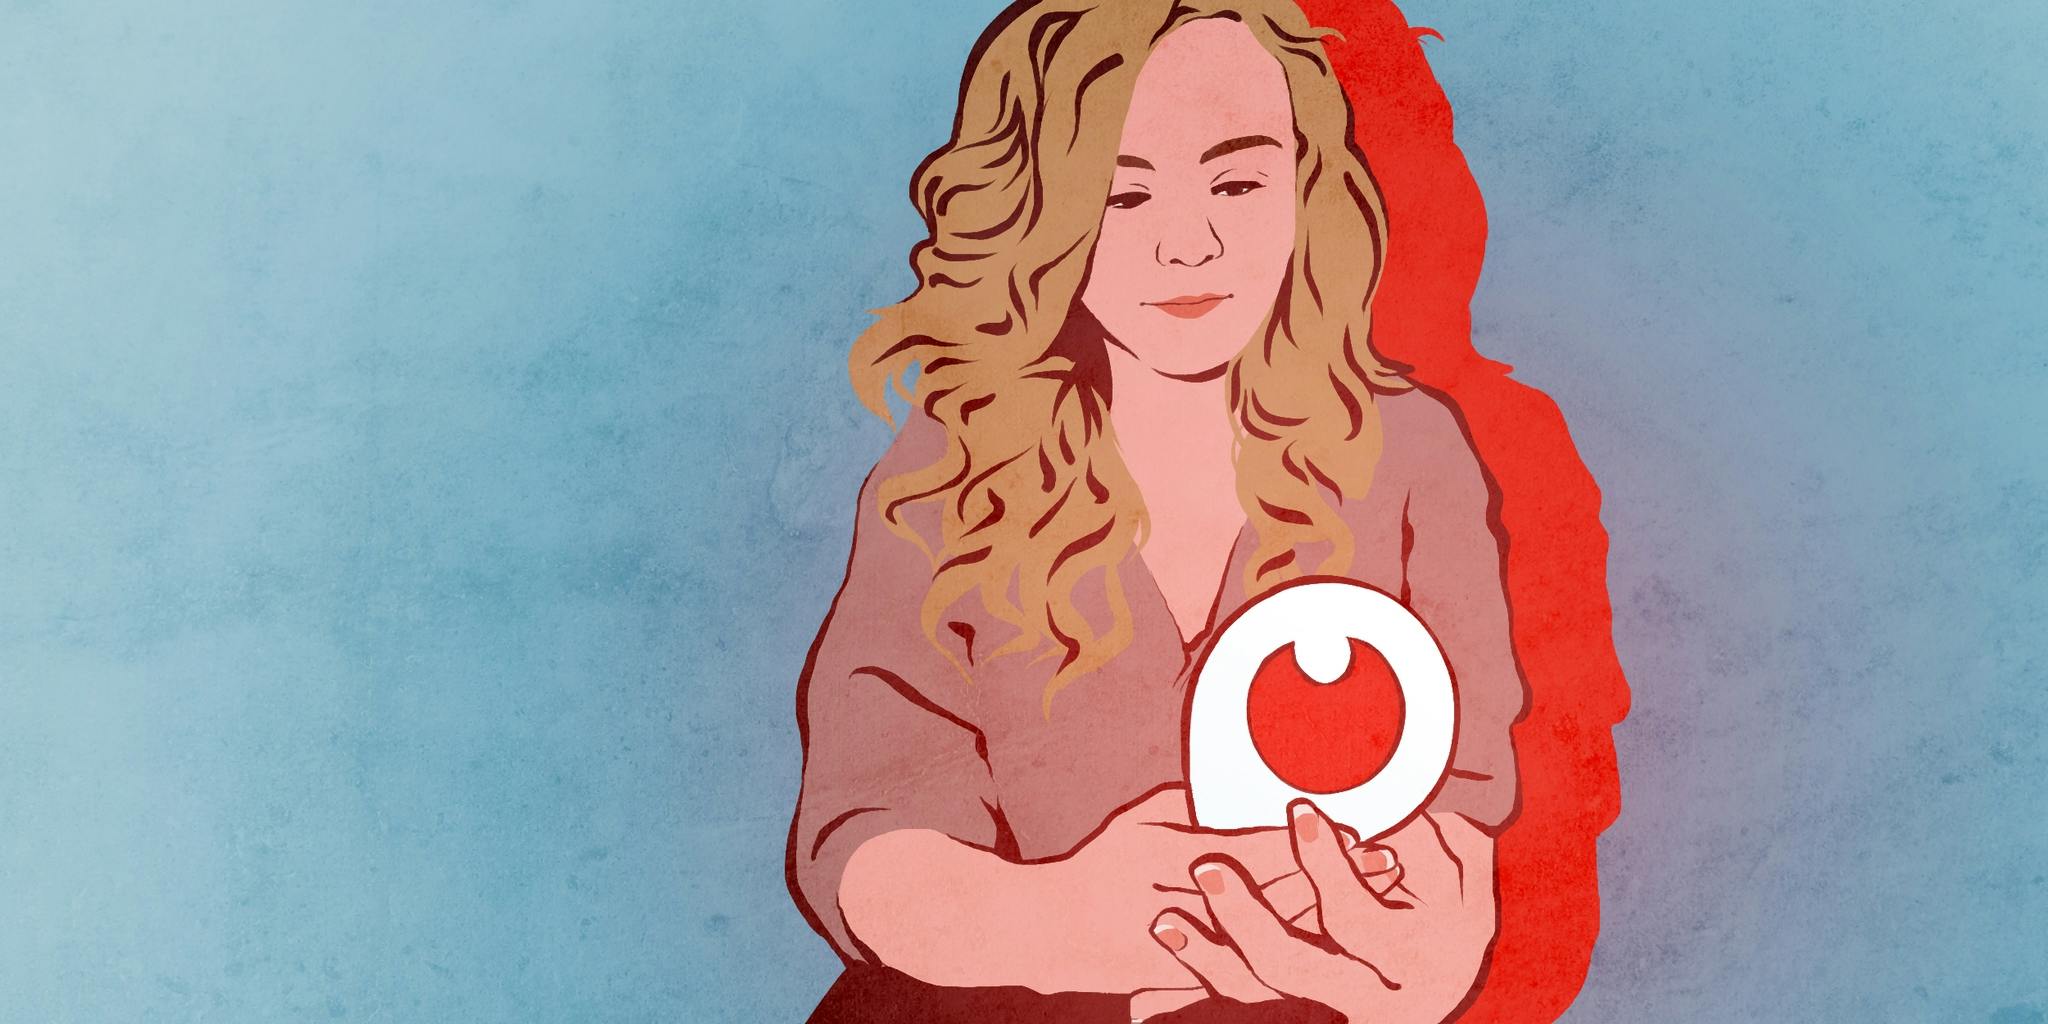 Laid bare: Bree Olson goes from porn to Periscope